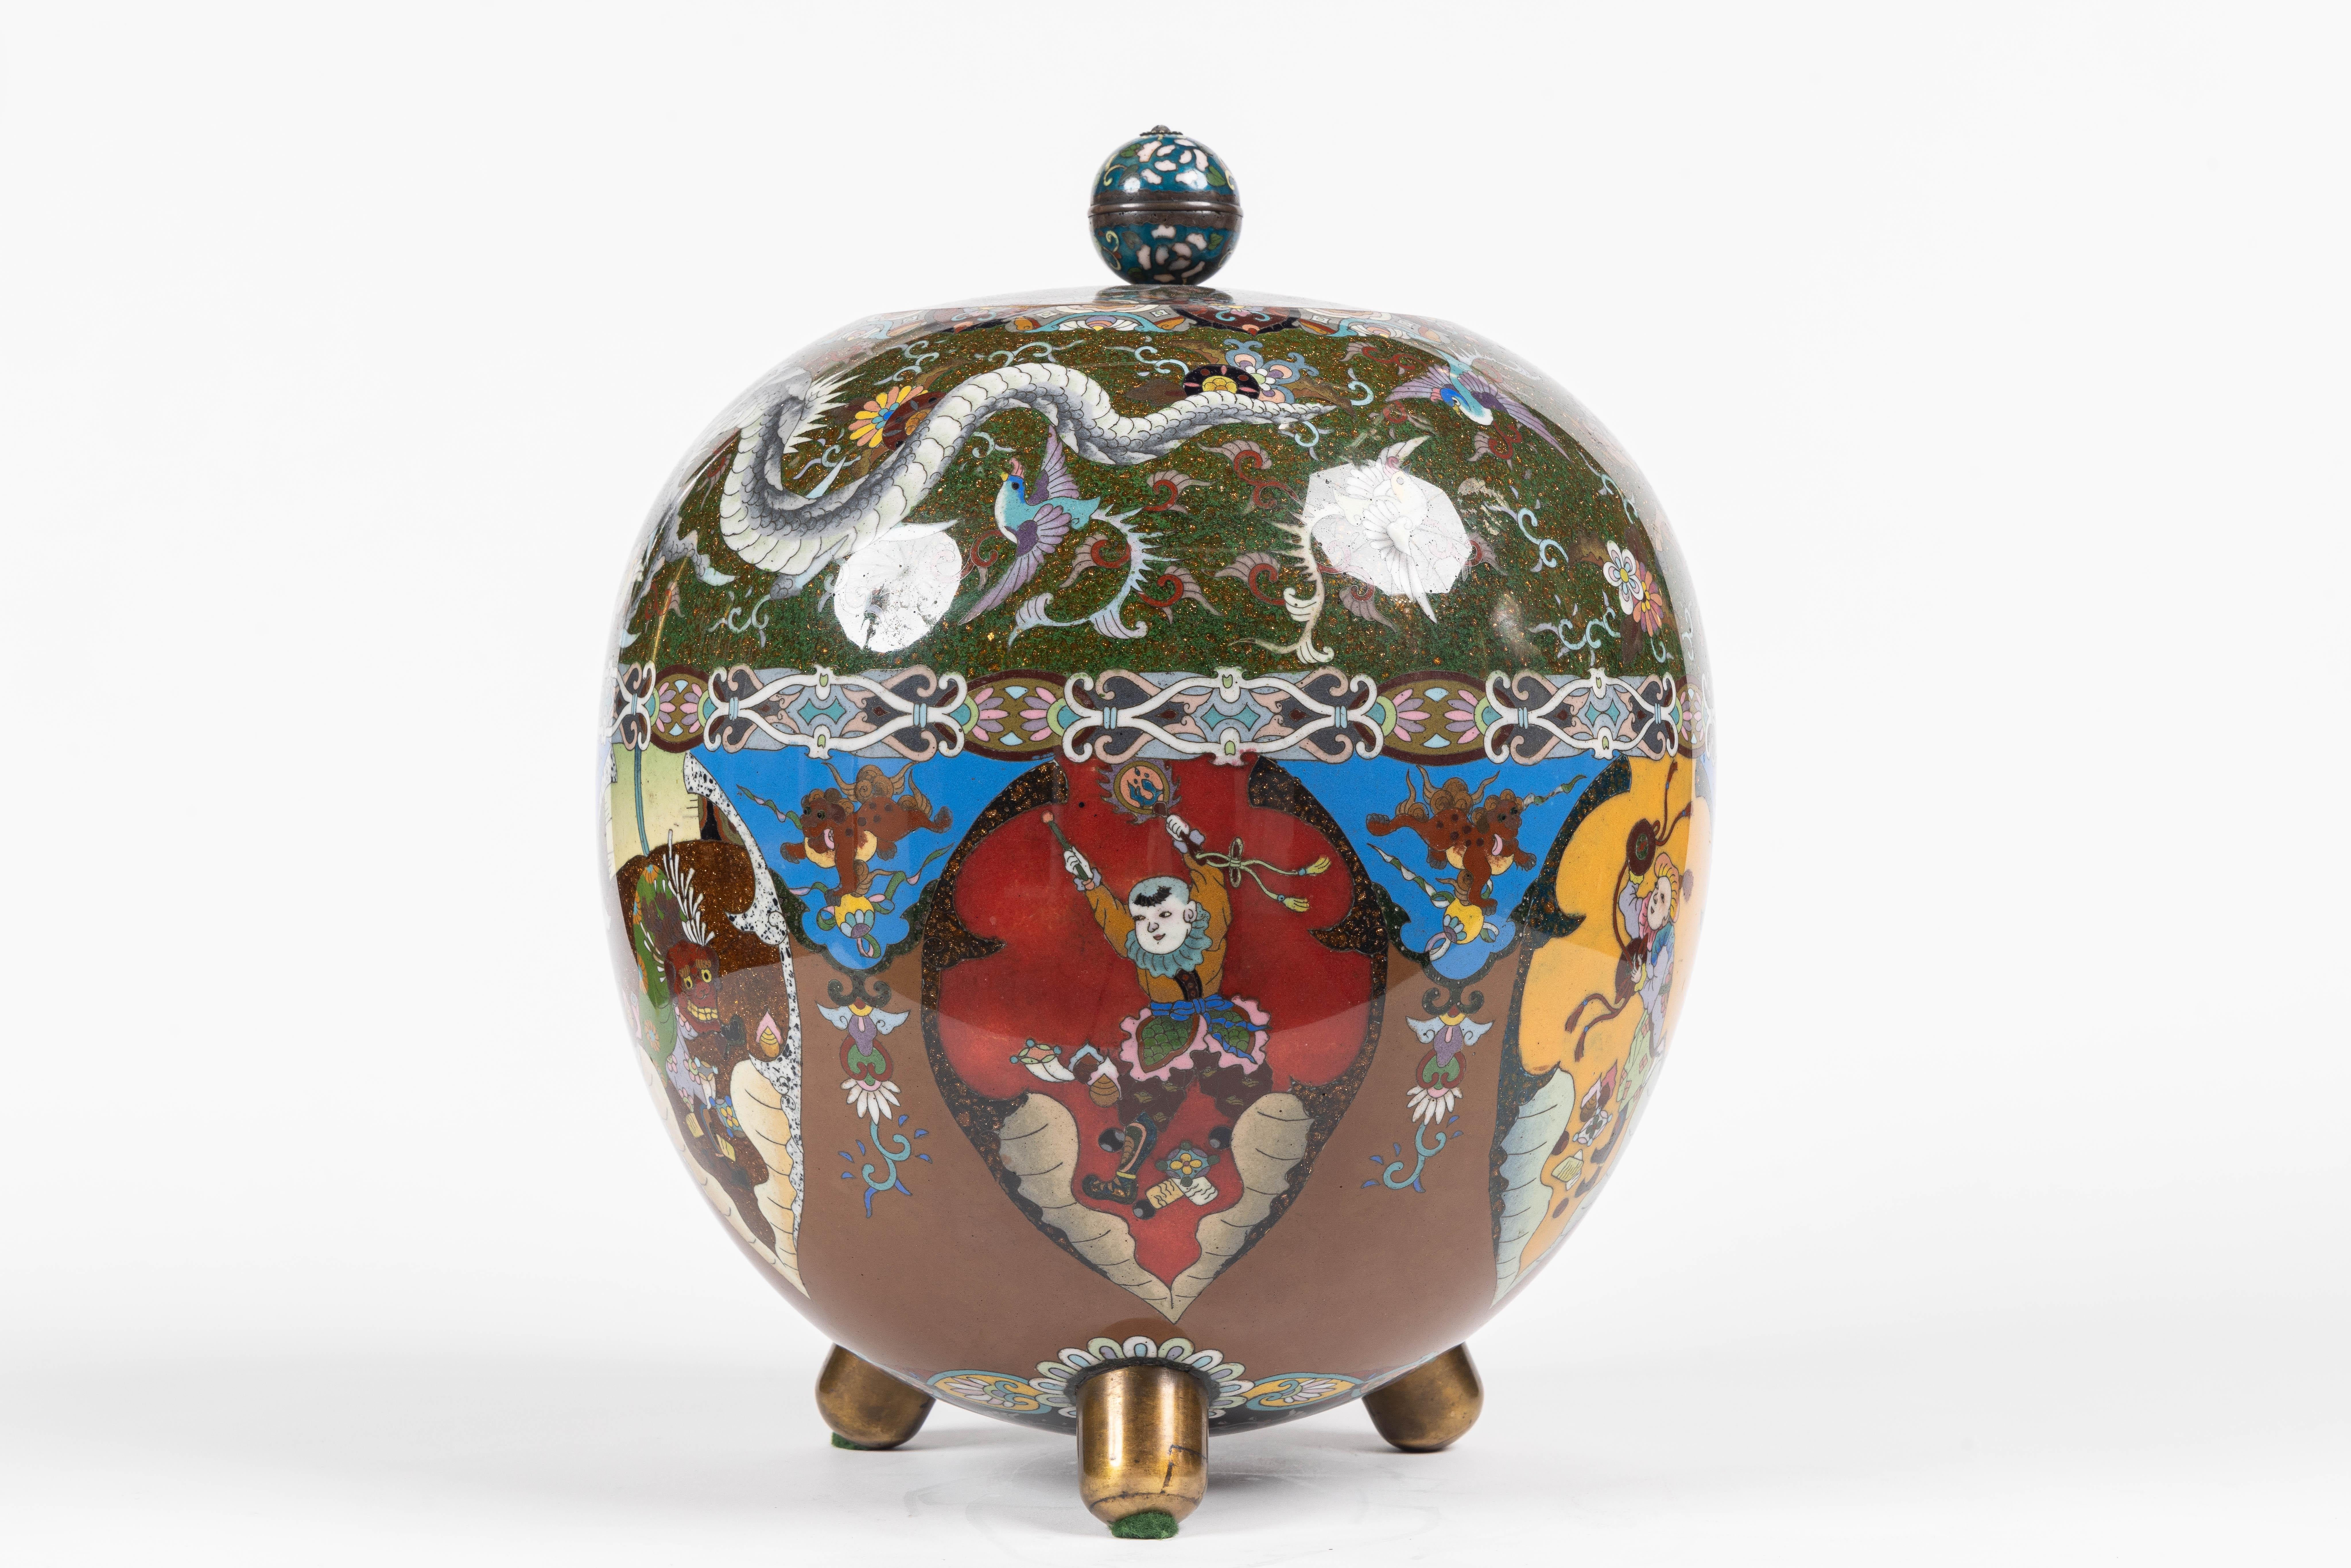 Majestic Japanese Cloisonne Enamel Covered Jar with Dragons, Theater Characters  In Good Condition For Sale In New York, NY